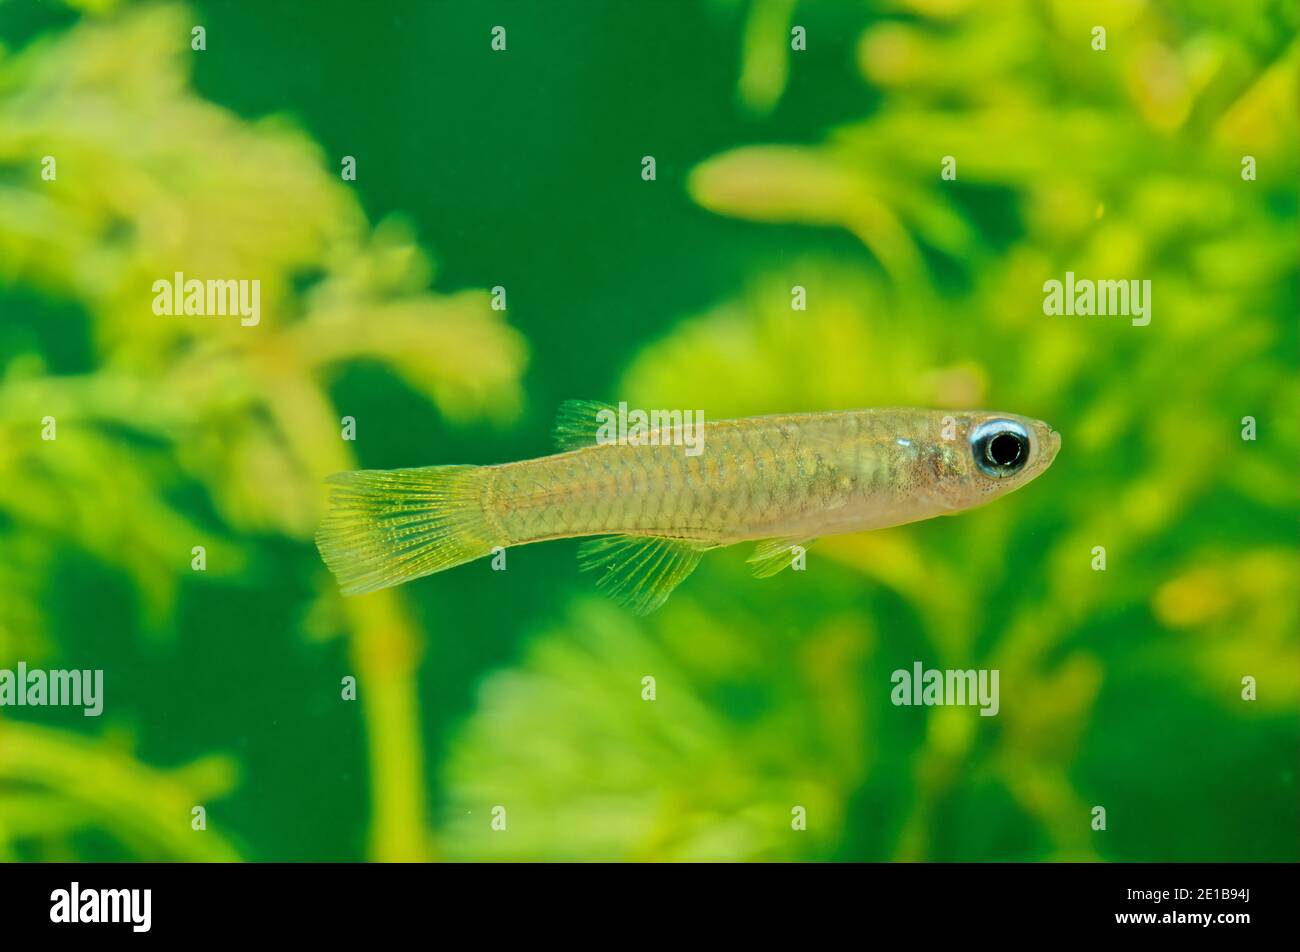 Poropanchax normani, known as the Norman's lampeye, is a species of killifish native to Africa. Stock Photo